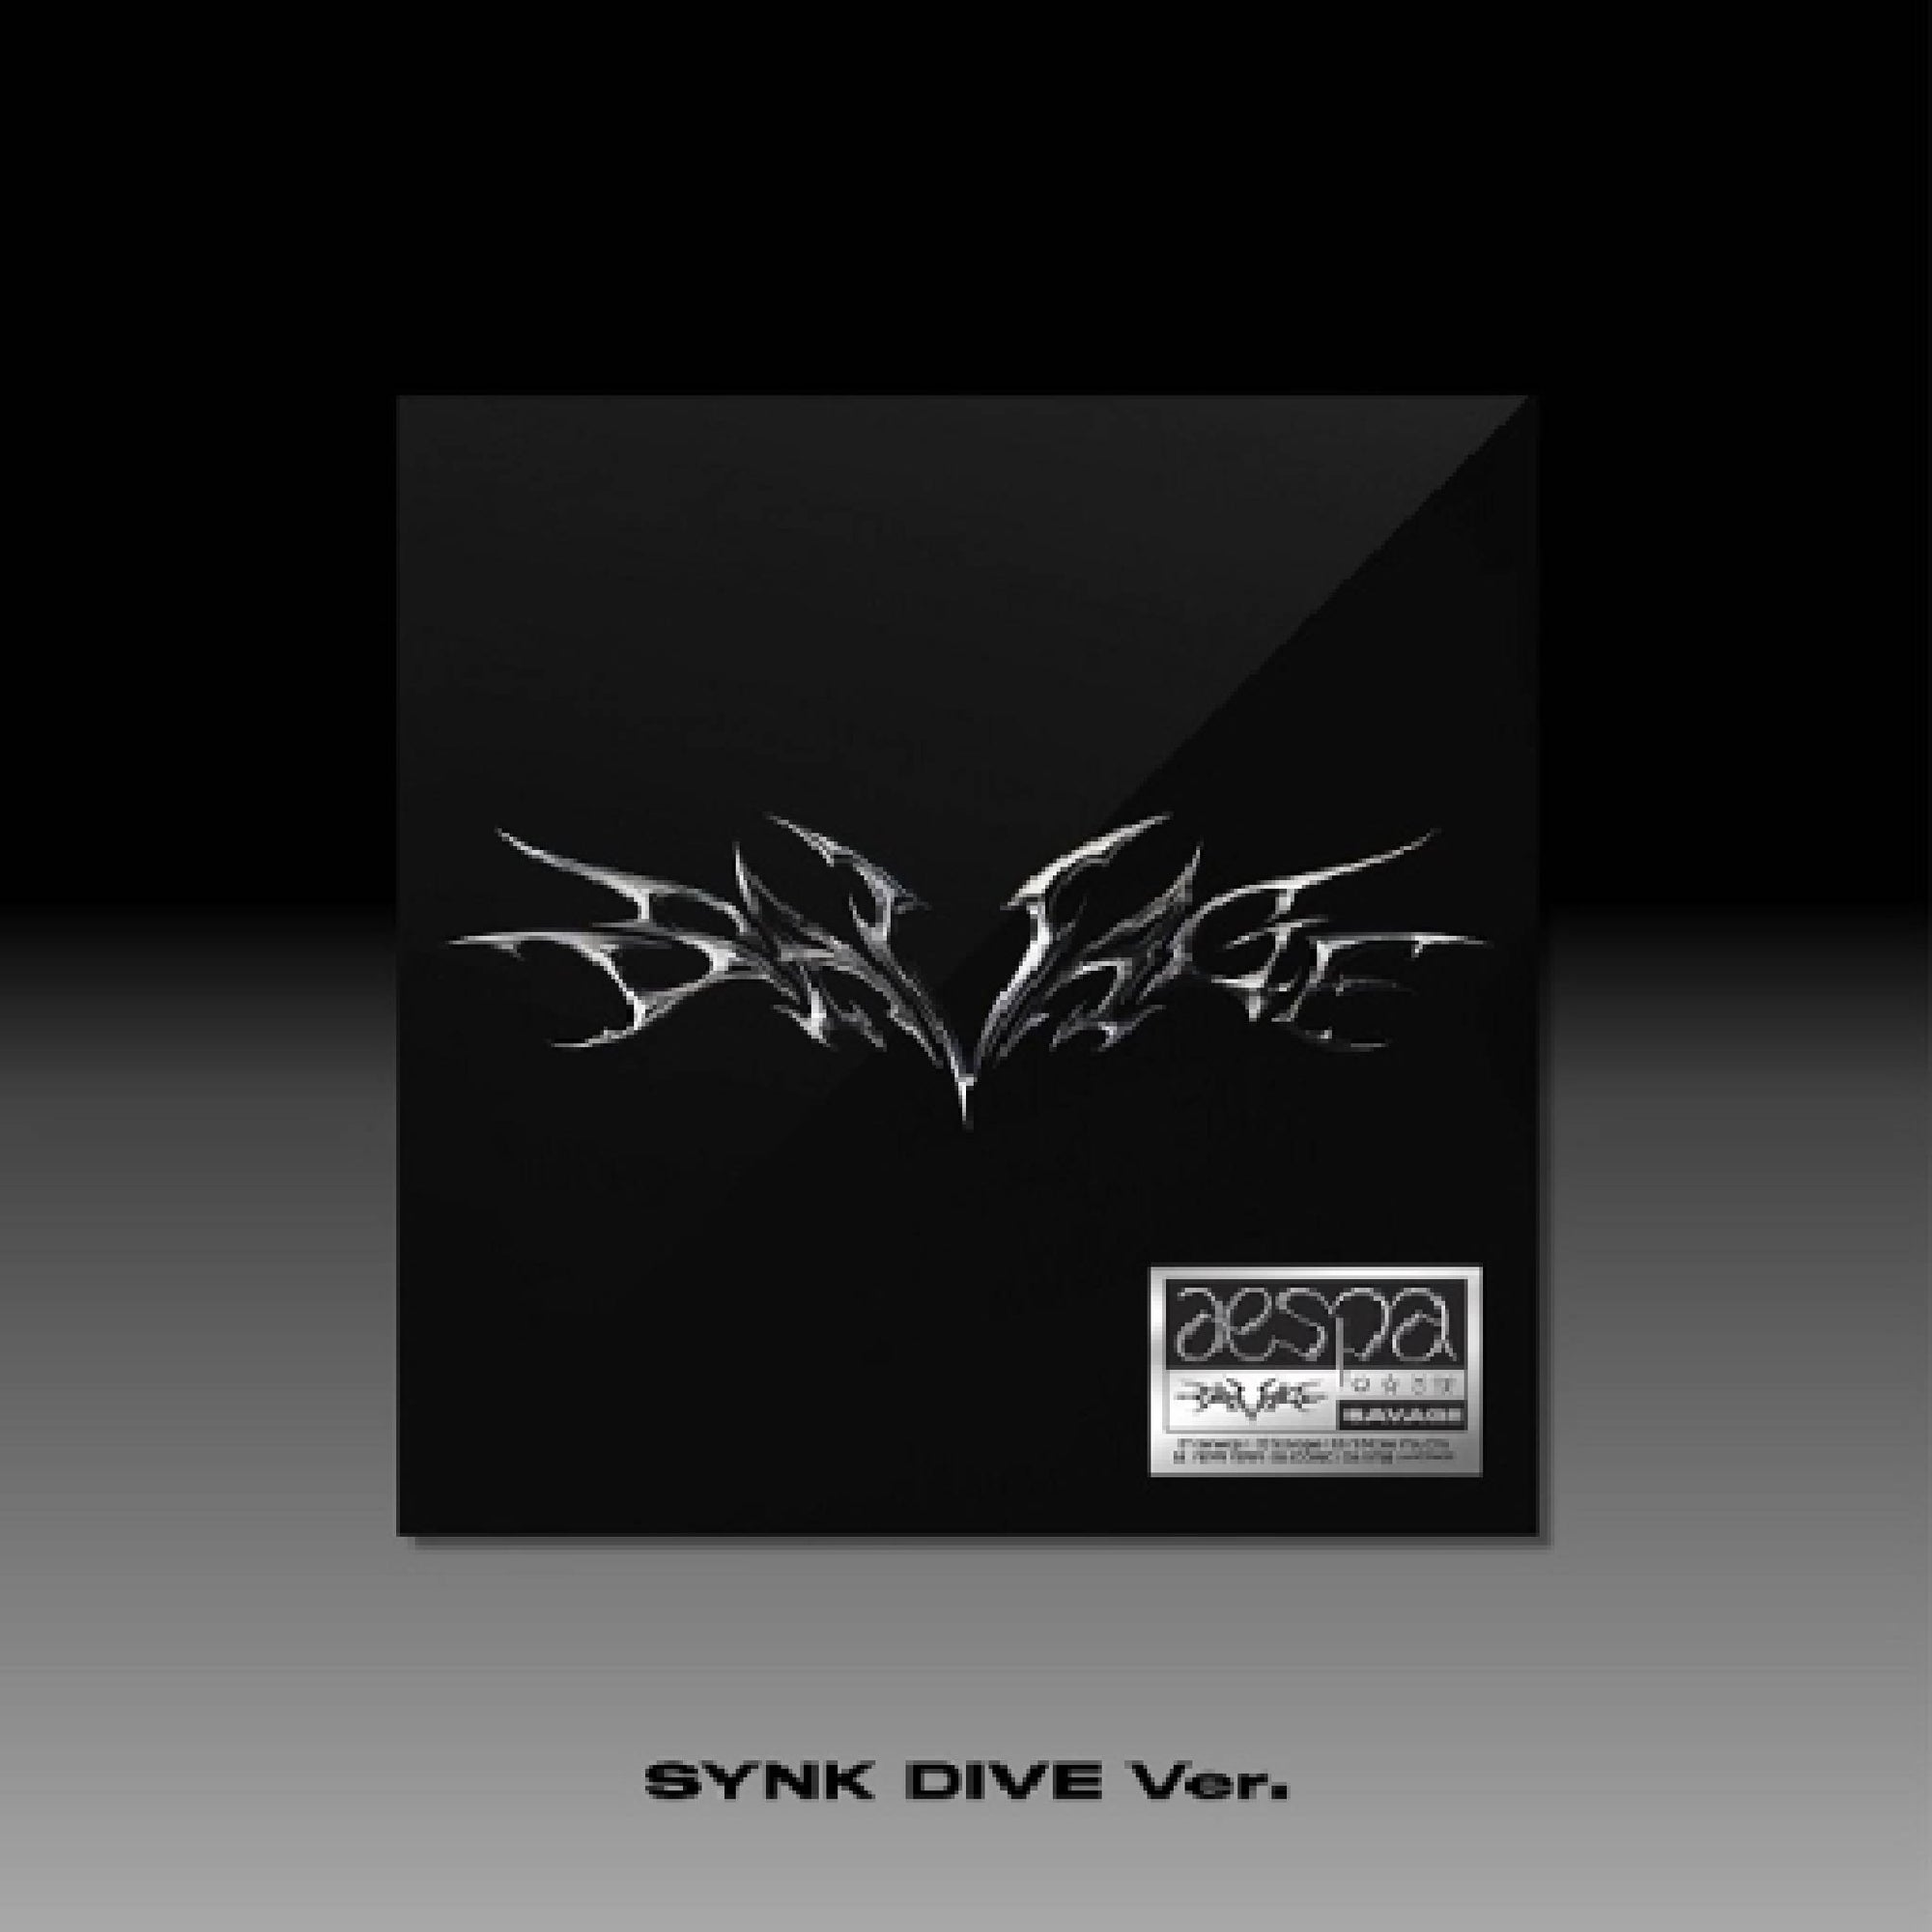 SAVAGE [ SYNK DIVE VER.]